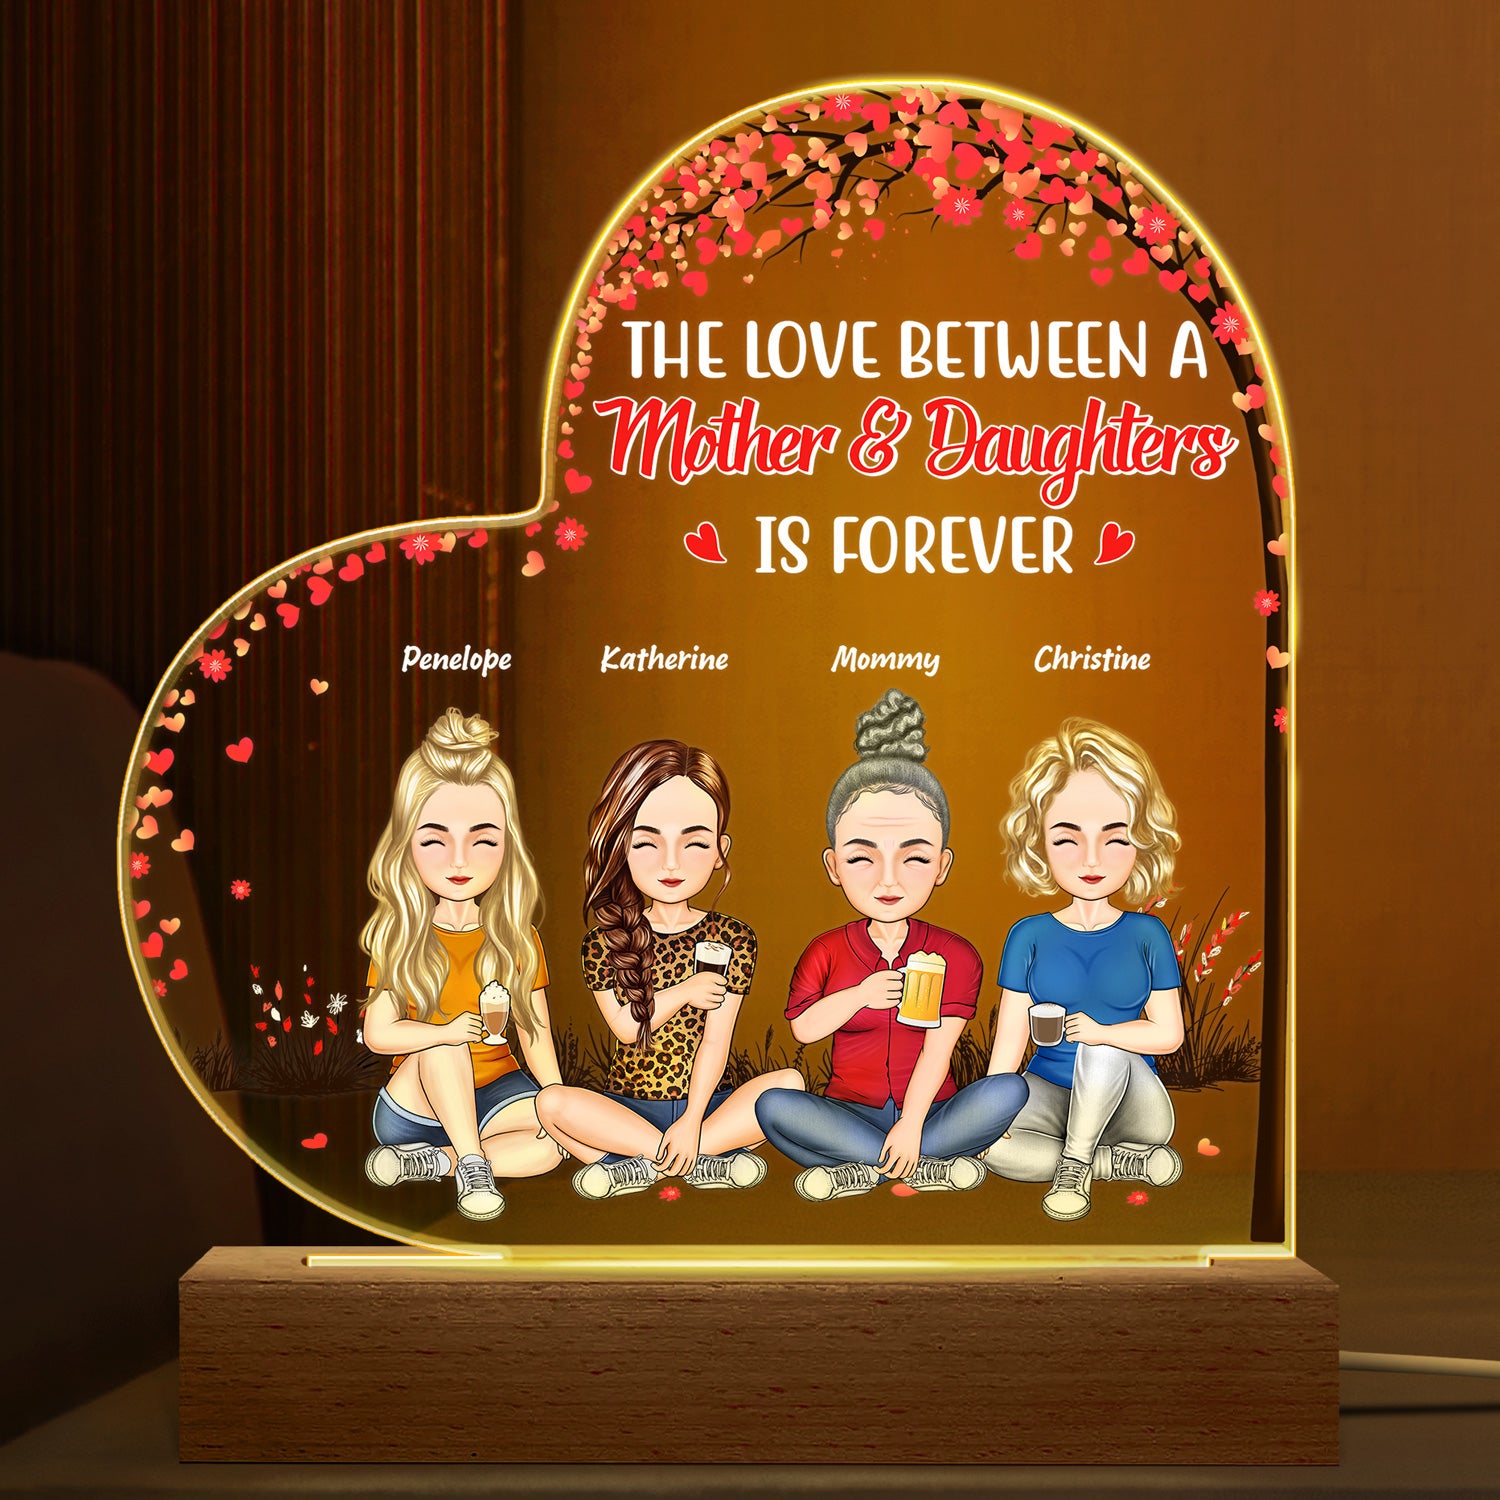 The Love Between Mother And Daughters Sons Children Is Forever - Birthday, Loving Gift For Mommy, Mother, Grandma, Grandmother - Personalized Custom 3D Led Light Wooden Base